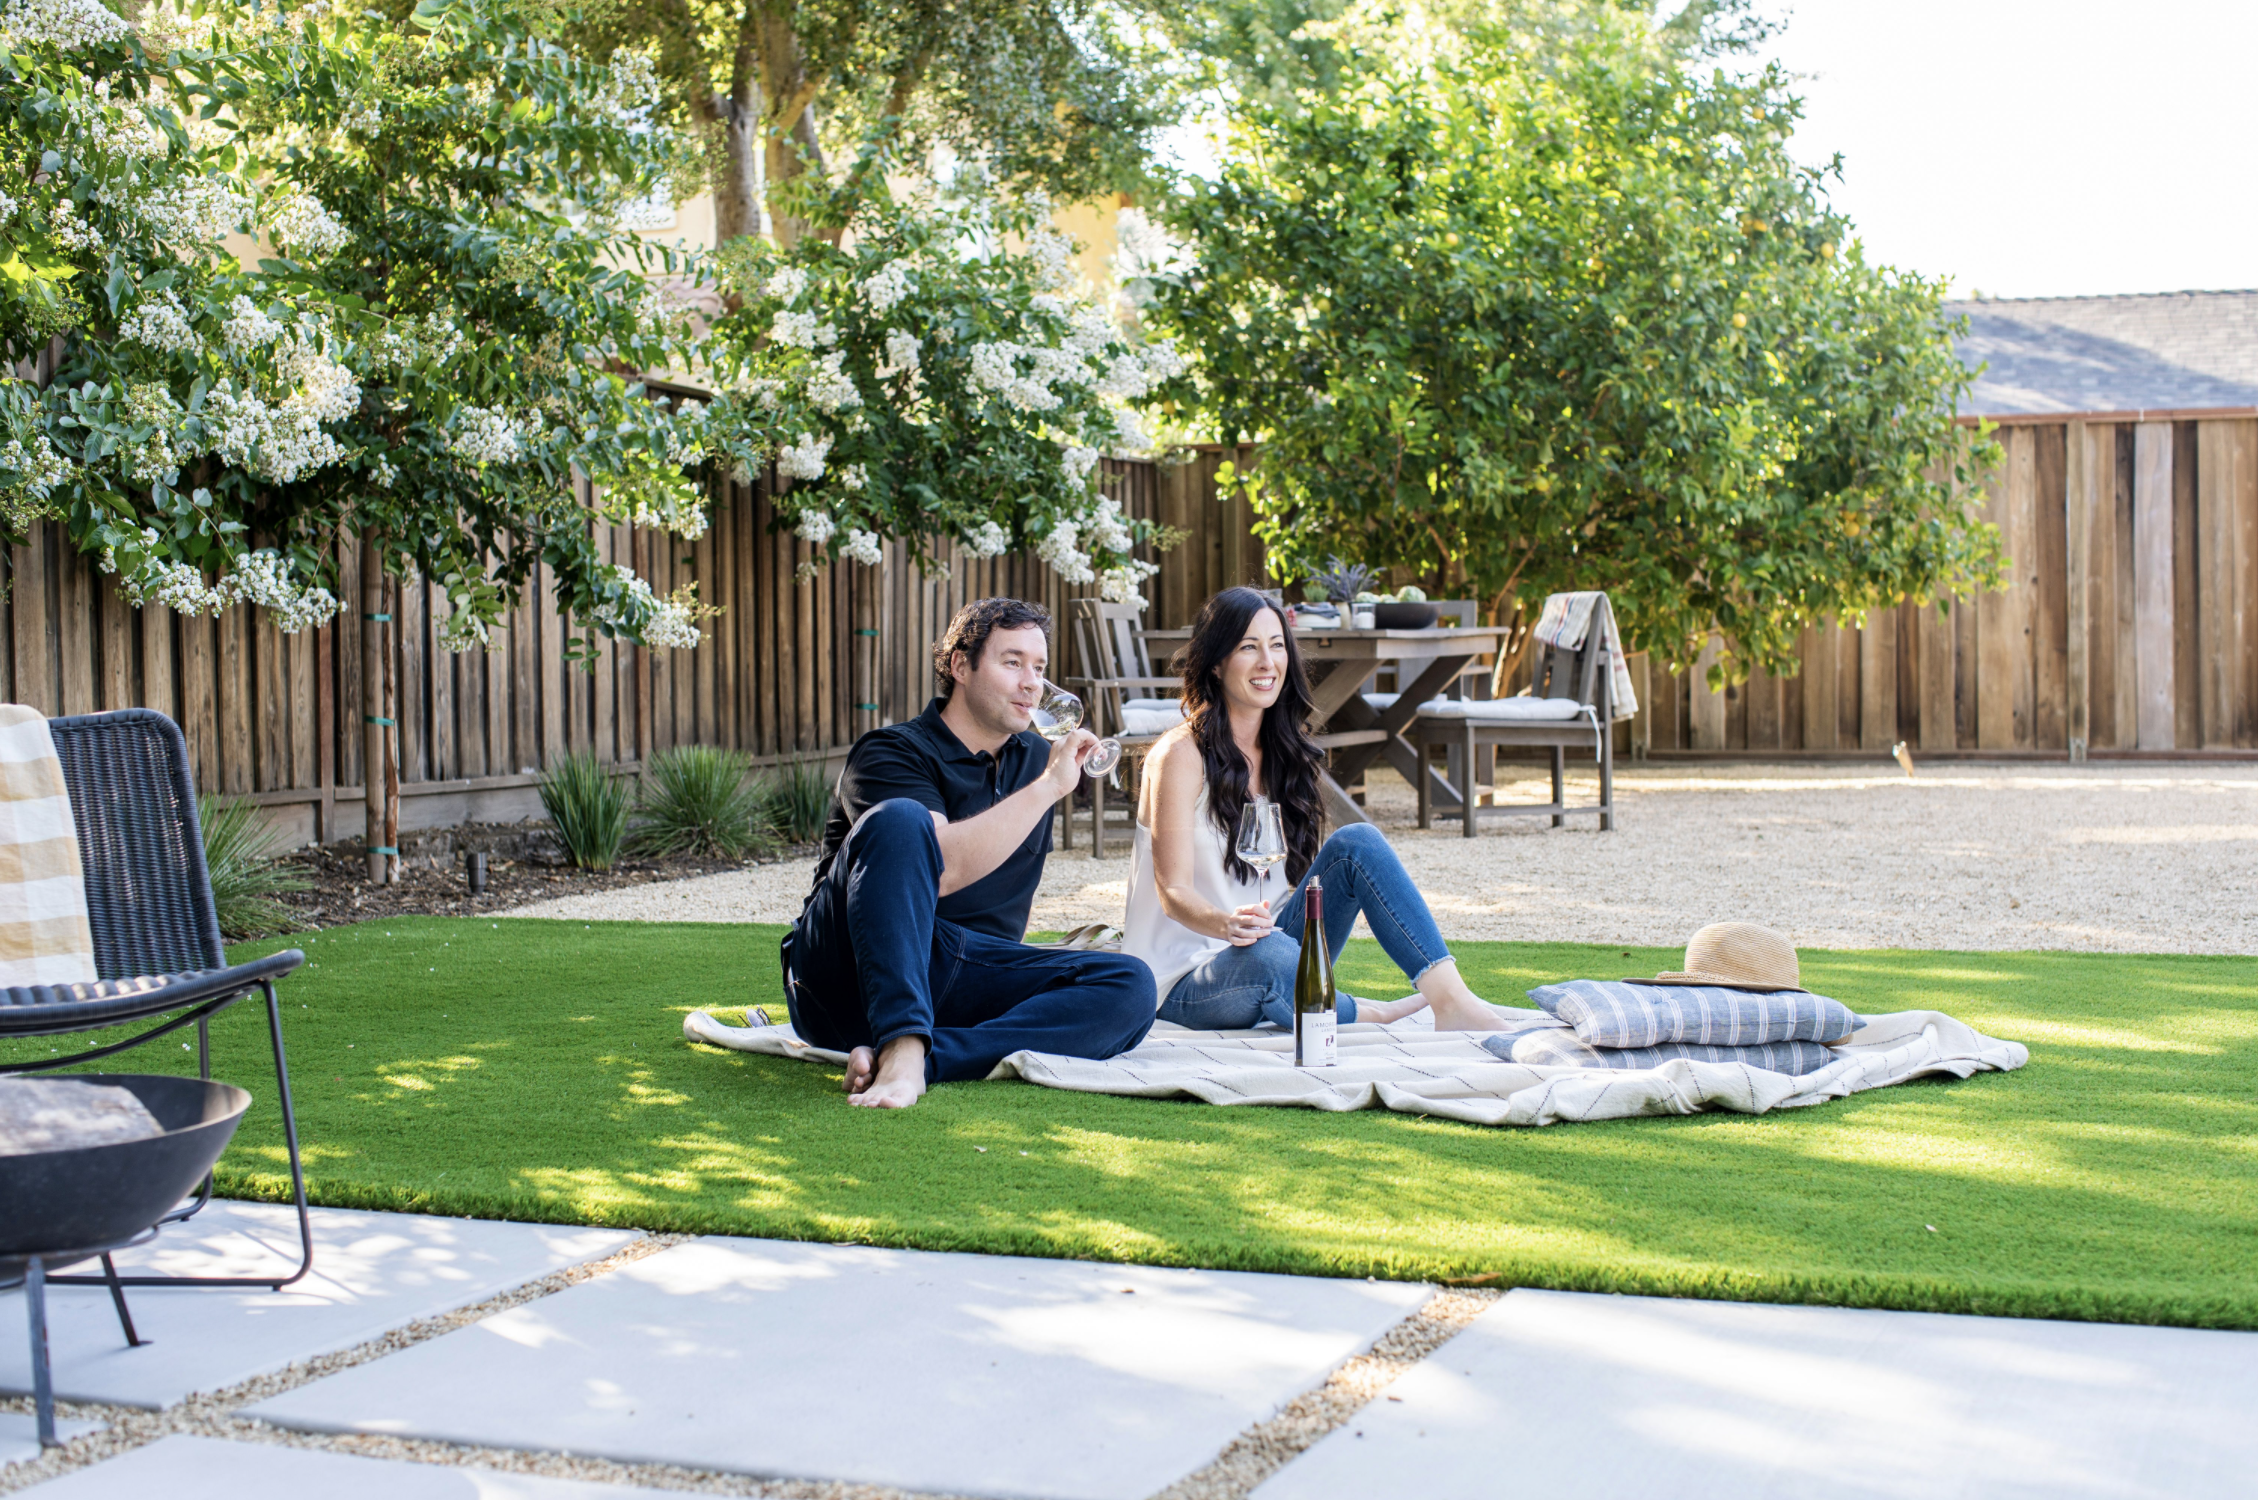 A man and woman having picnic on a lawn in a fenced backyard with, paver stones and dining area